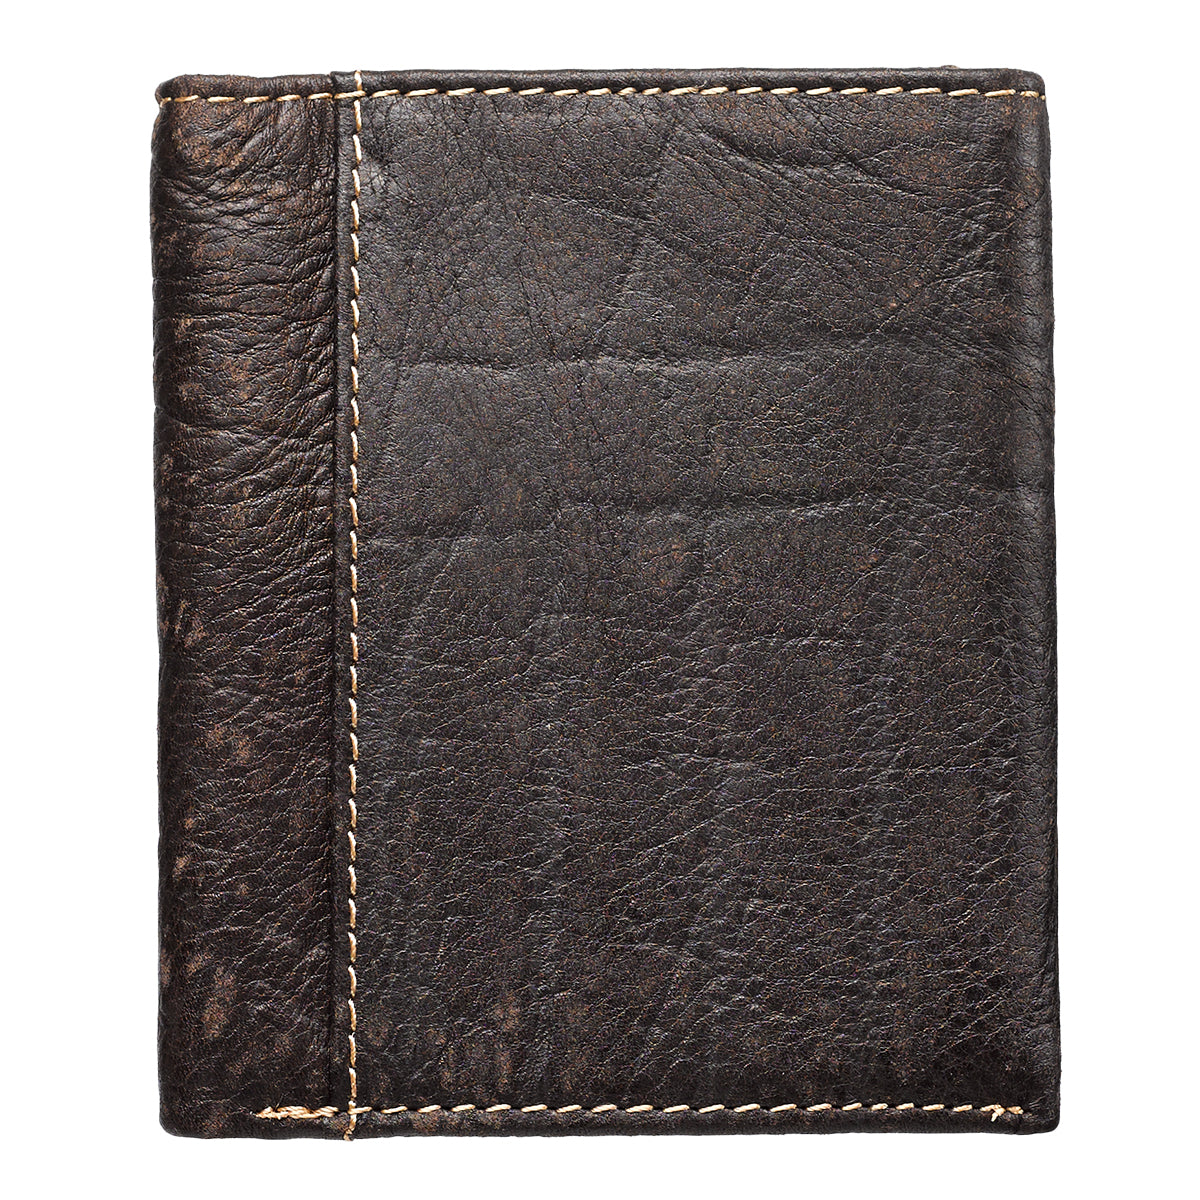 Image of Three Crosses in Brown Leather Wallet other